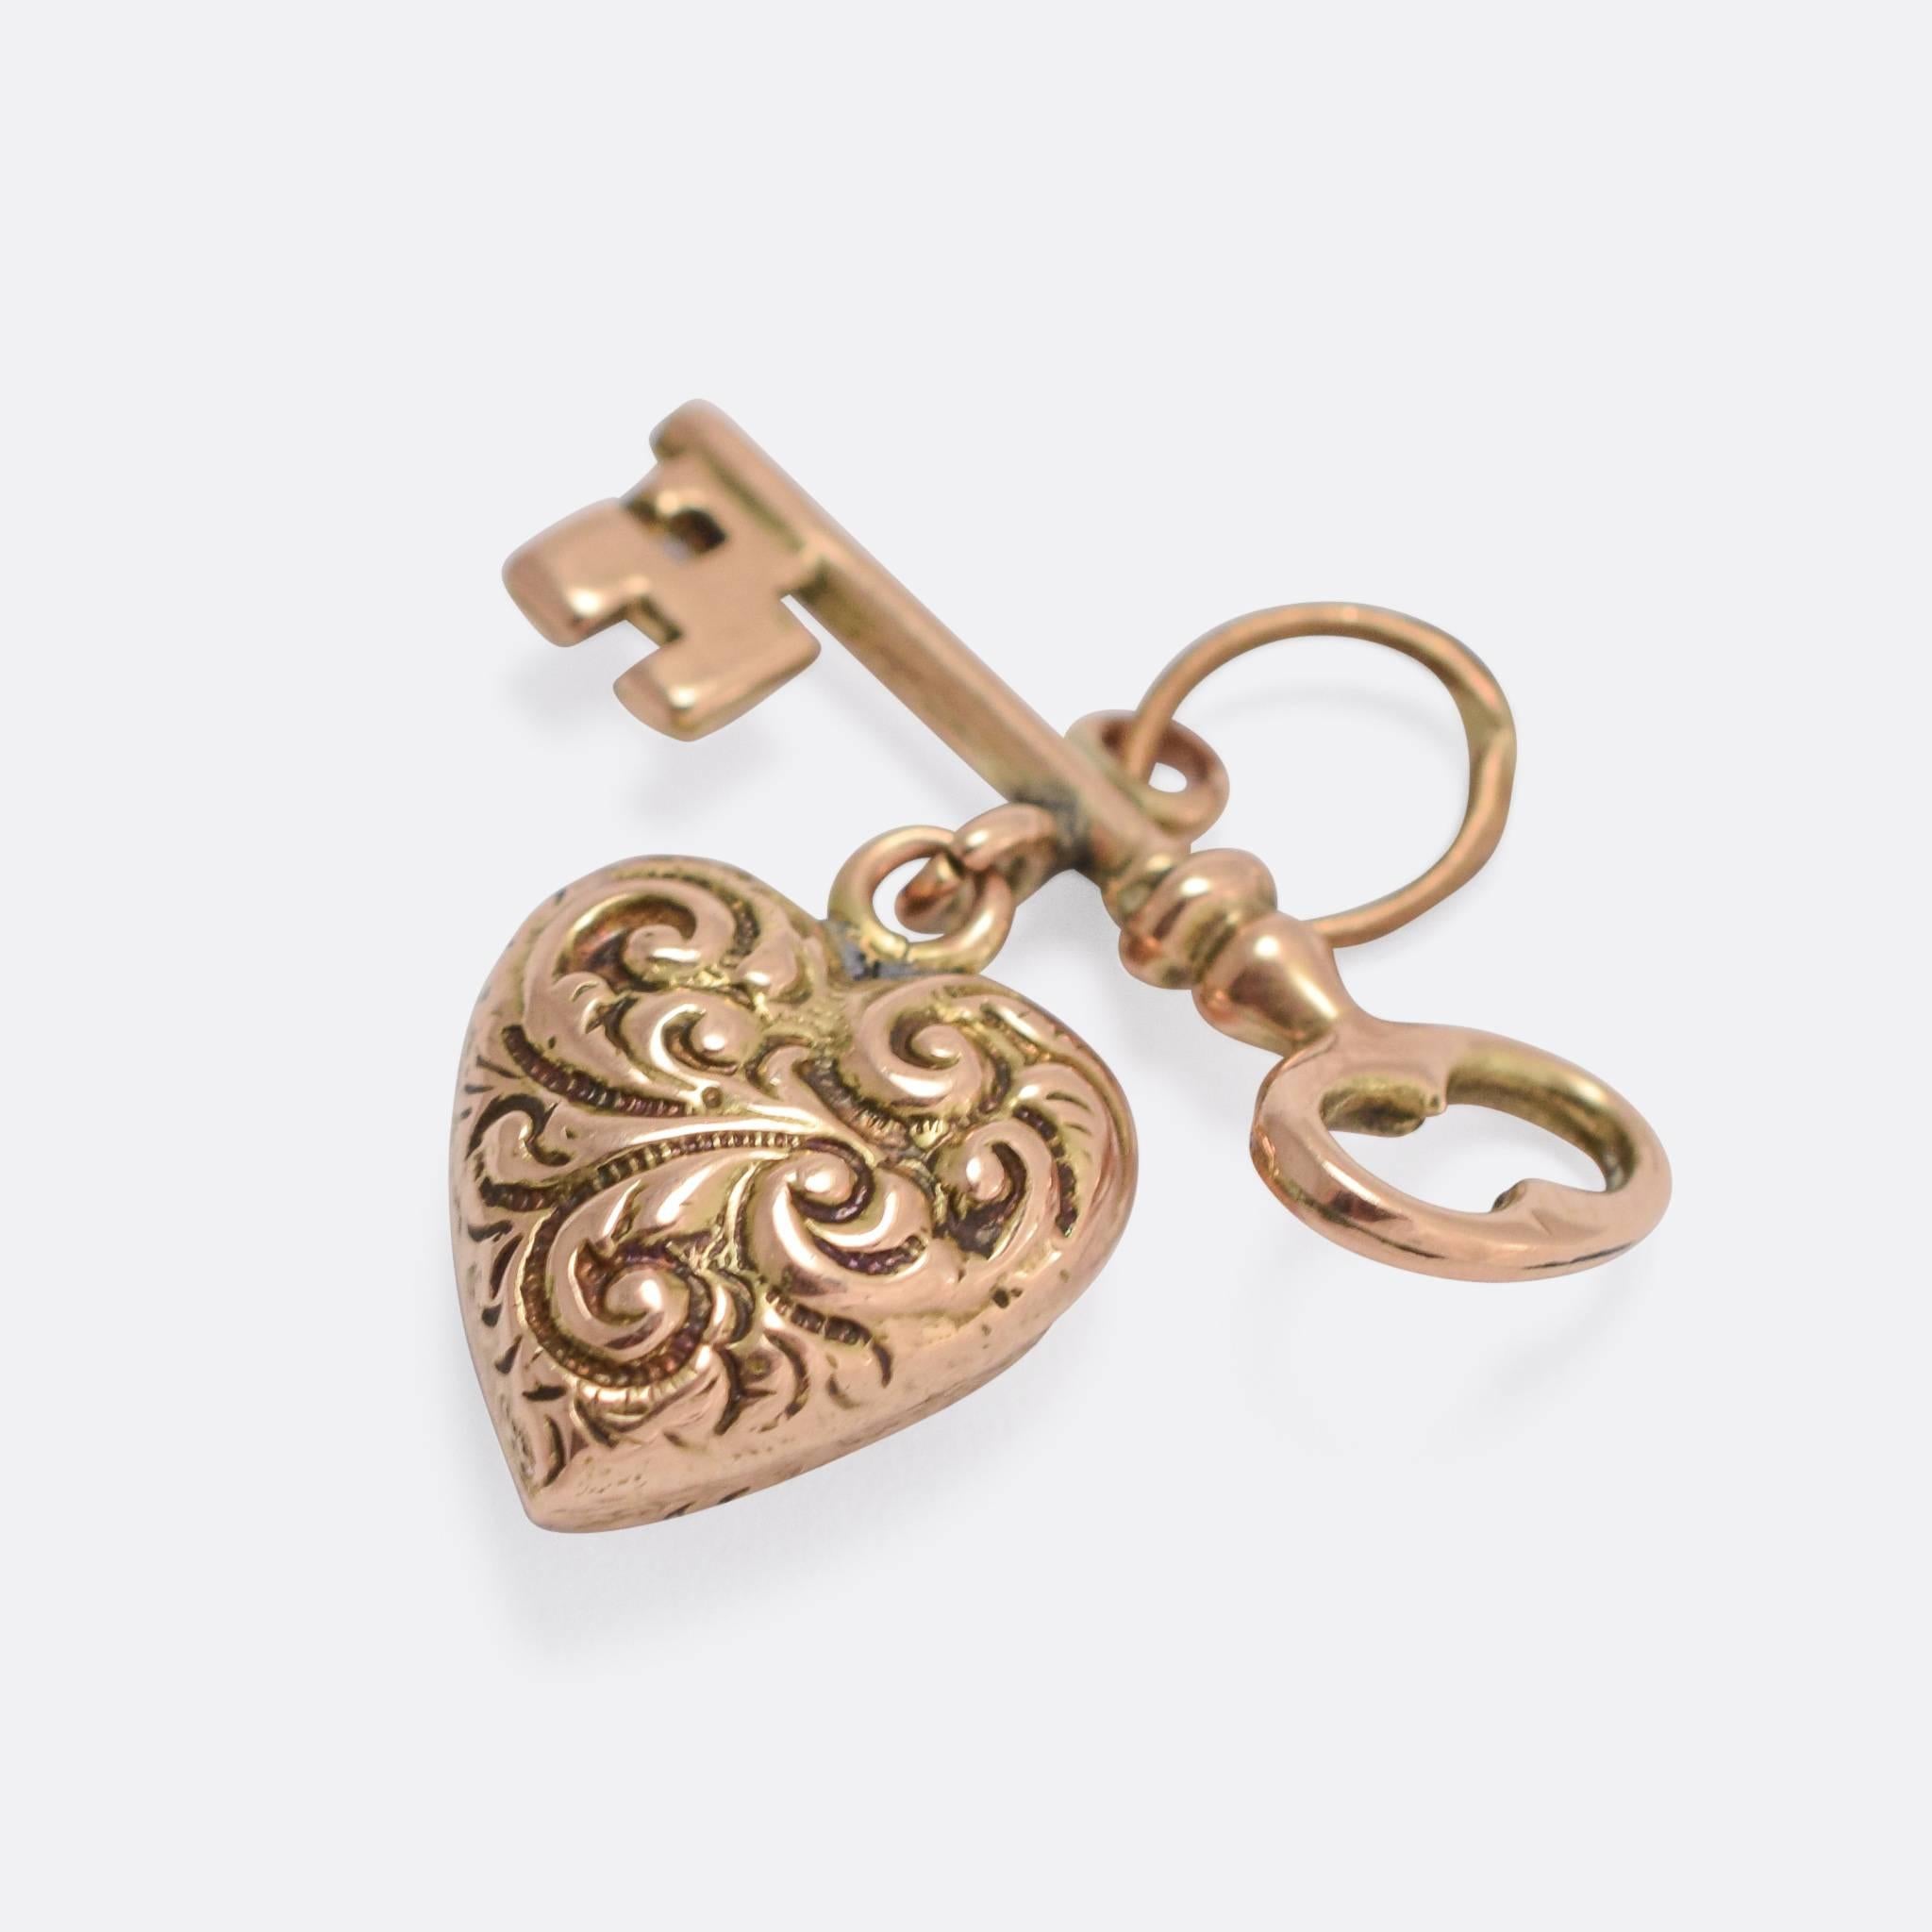 An adorable antique sentimental pendant, modelled as a key and chased heart. It's fully articulated, the two component parts hanging from a jump ring, and crafted from 9k gold throughout. The sentiment can be read as 